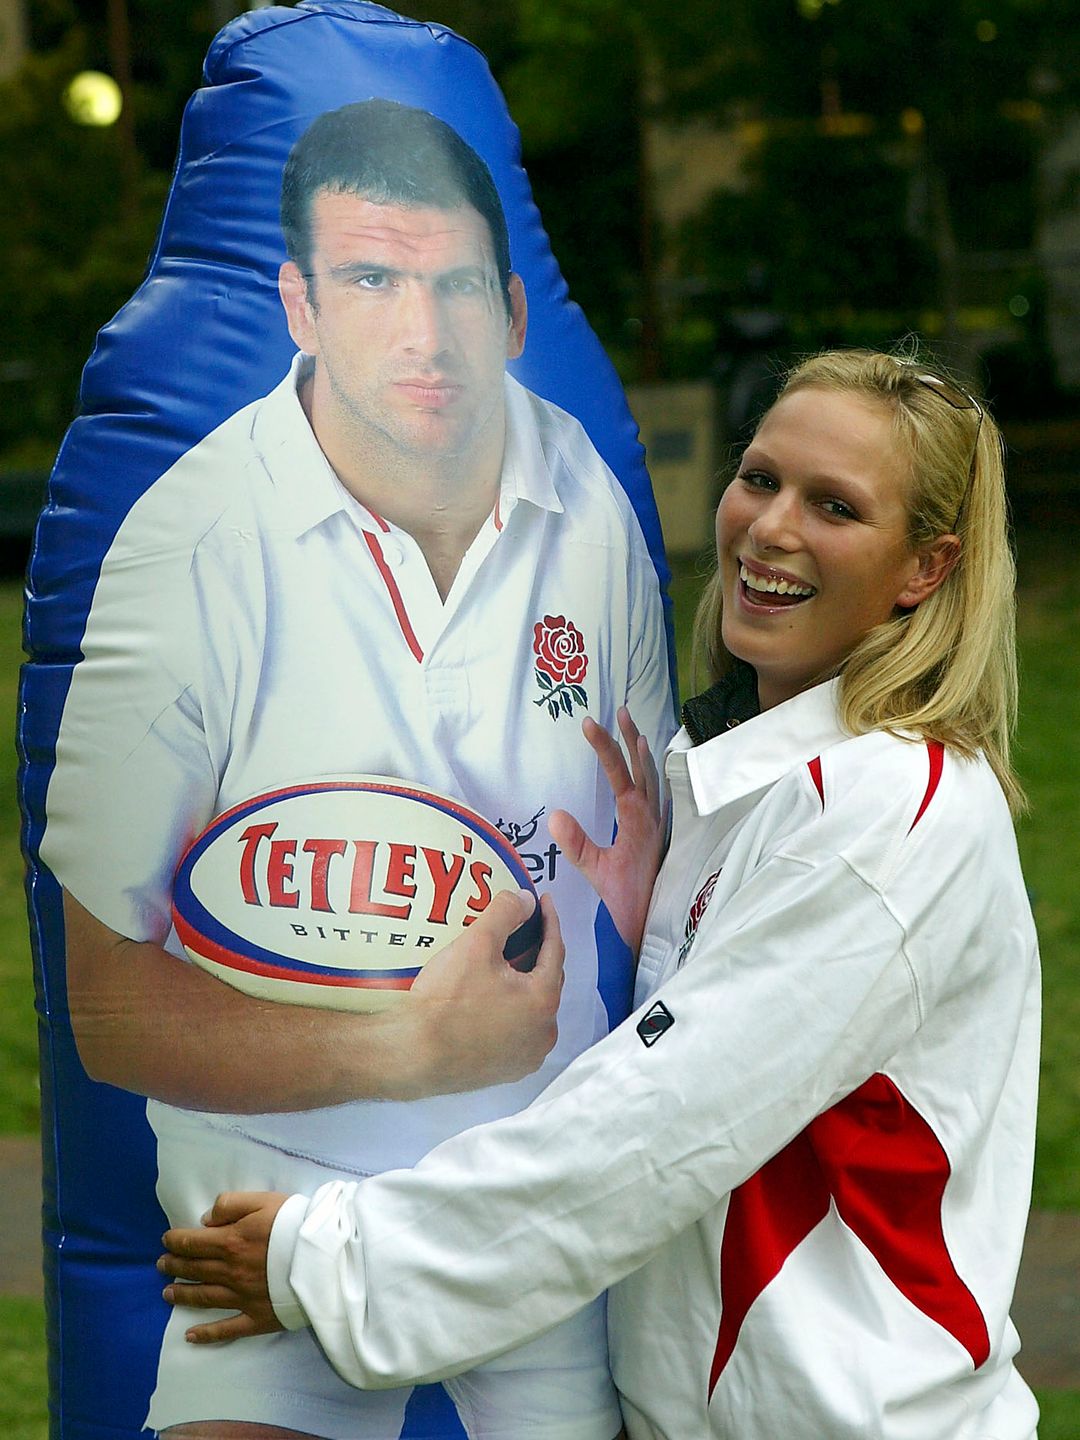 Zara Tindall hugging an inflatable rugby player